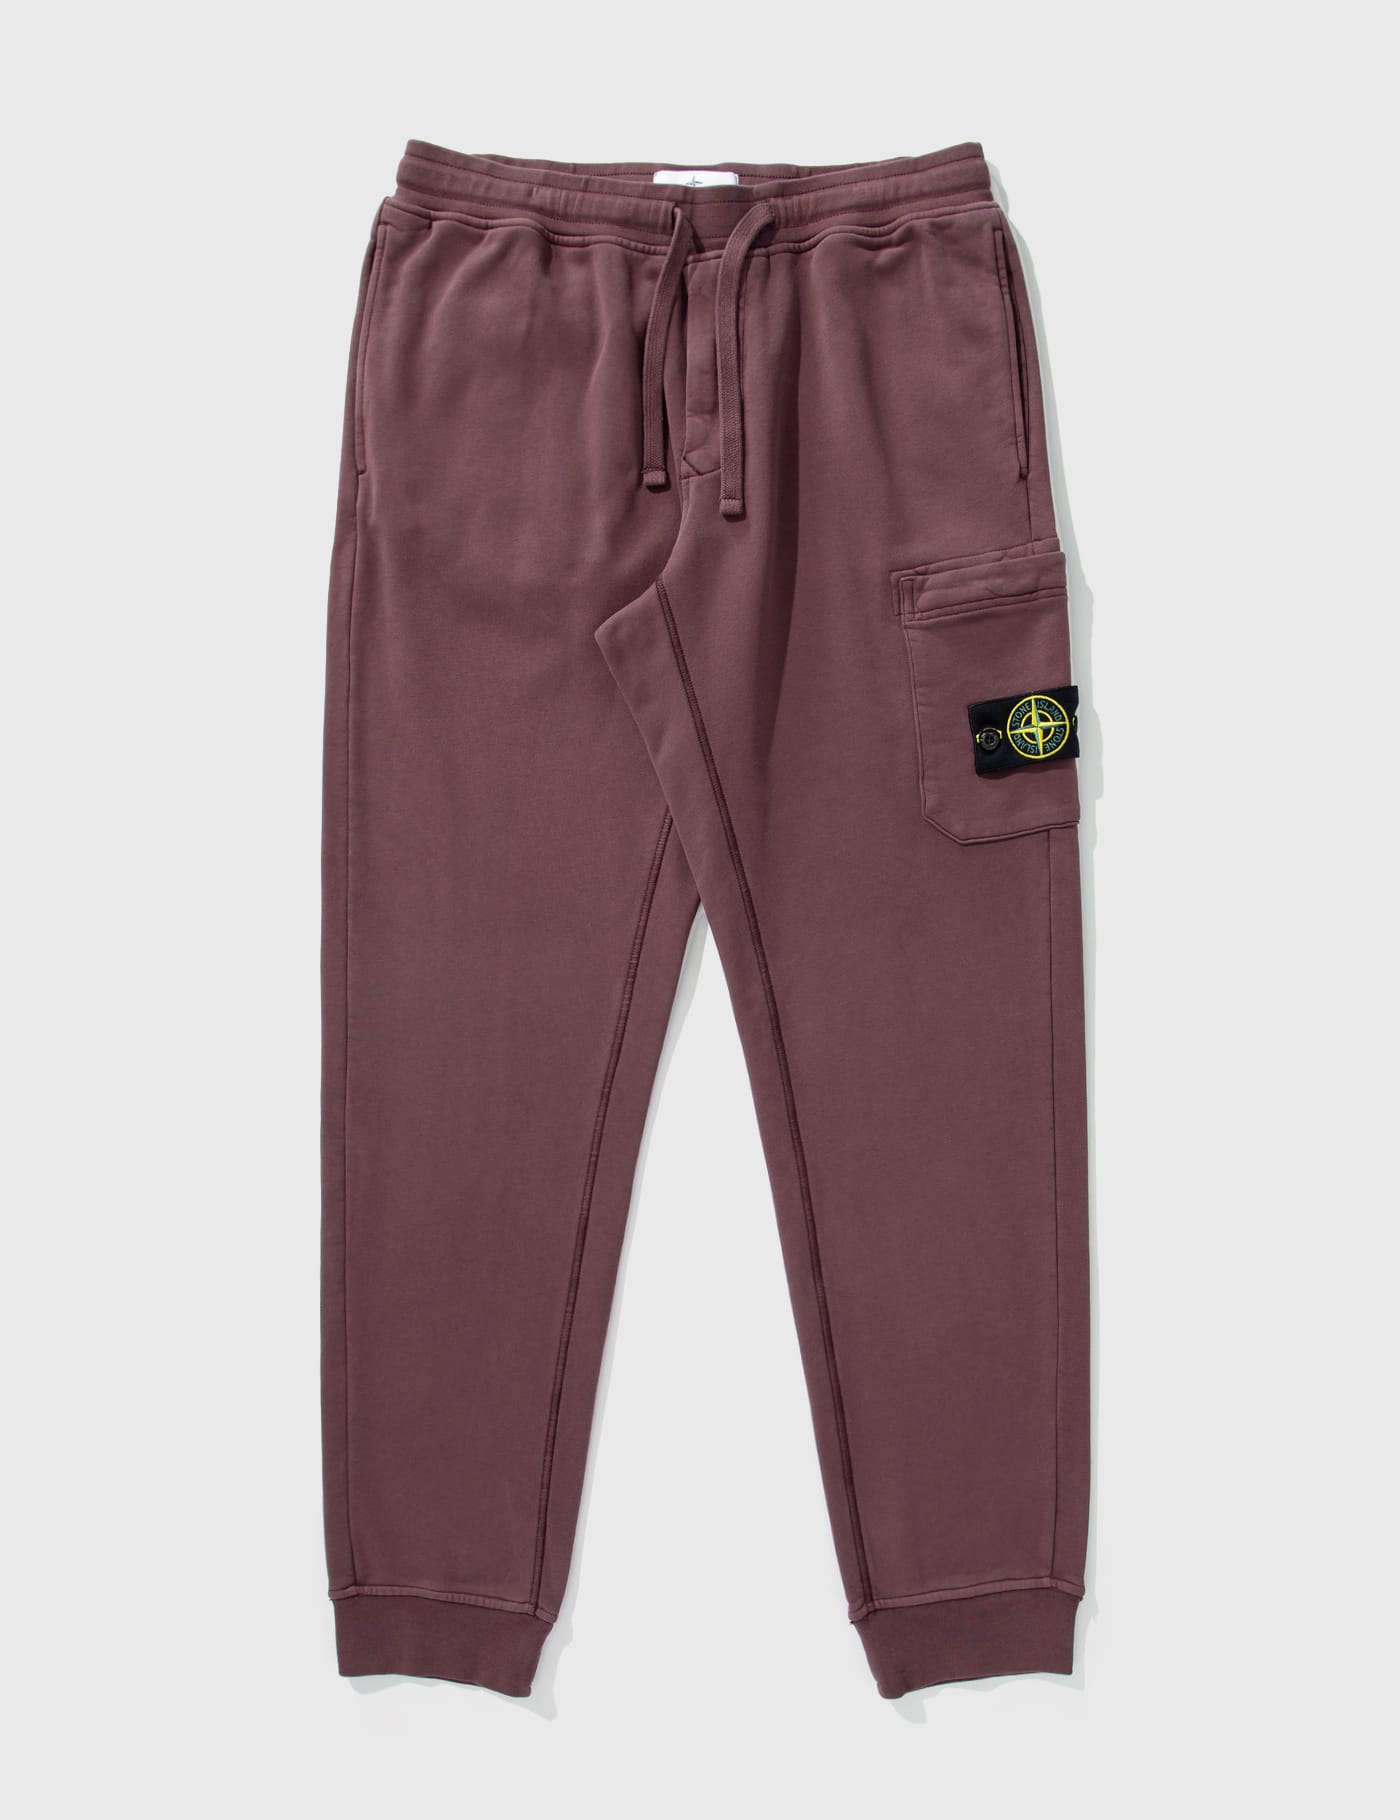 Stone Island - Skinny Fit Cargo Pants | HBX - Globally Curated 